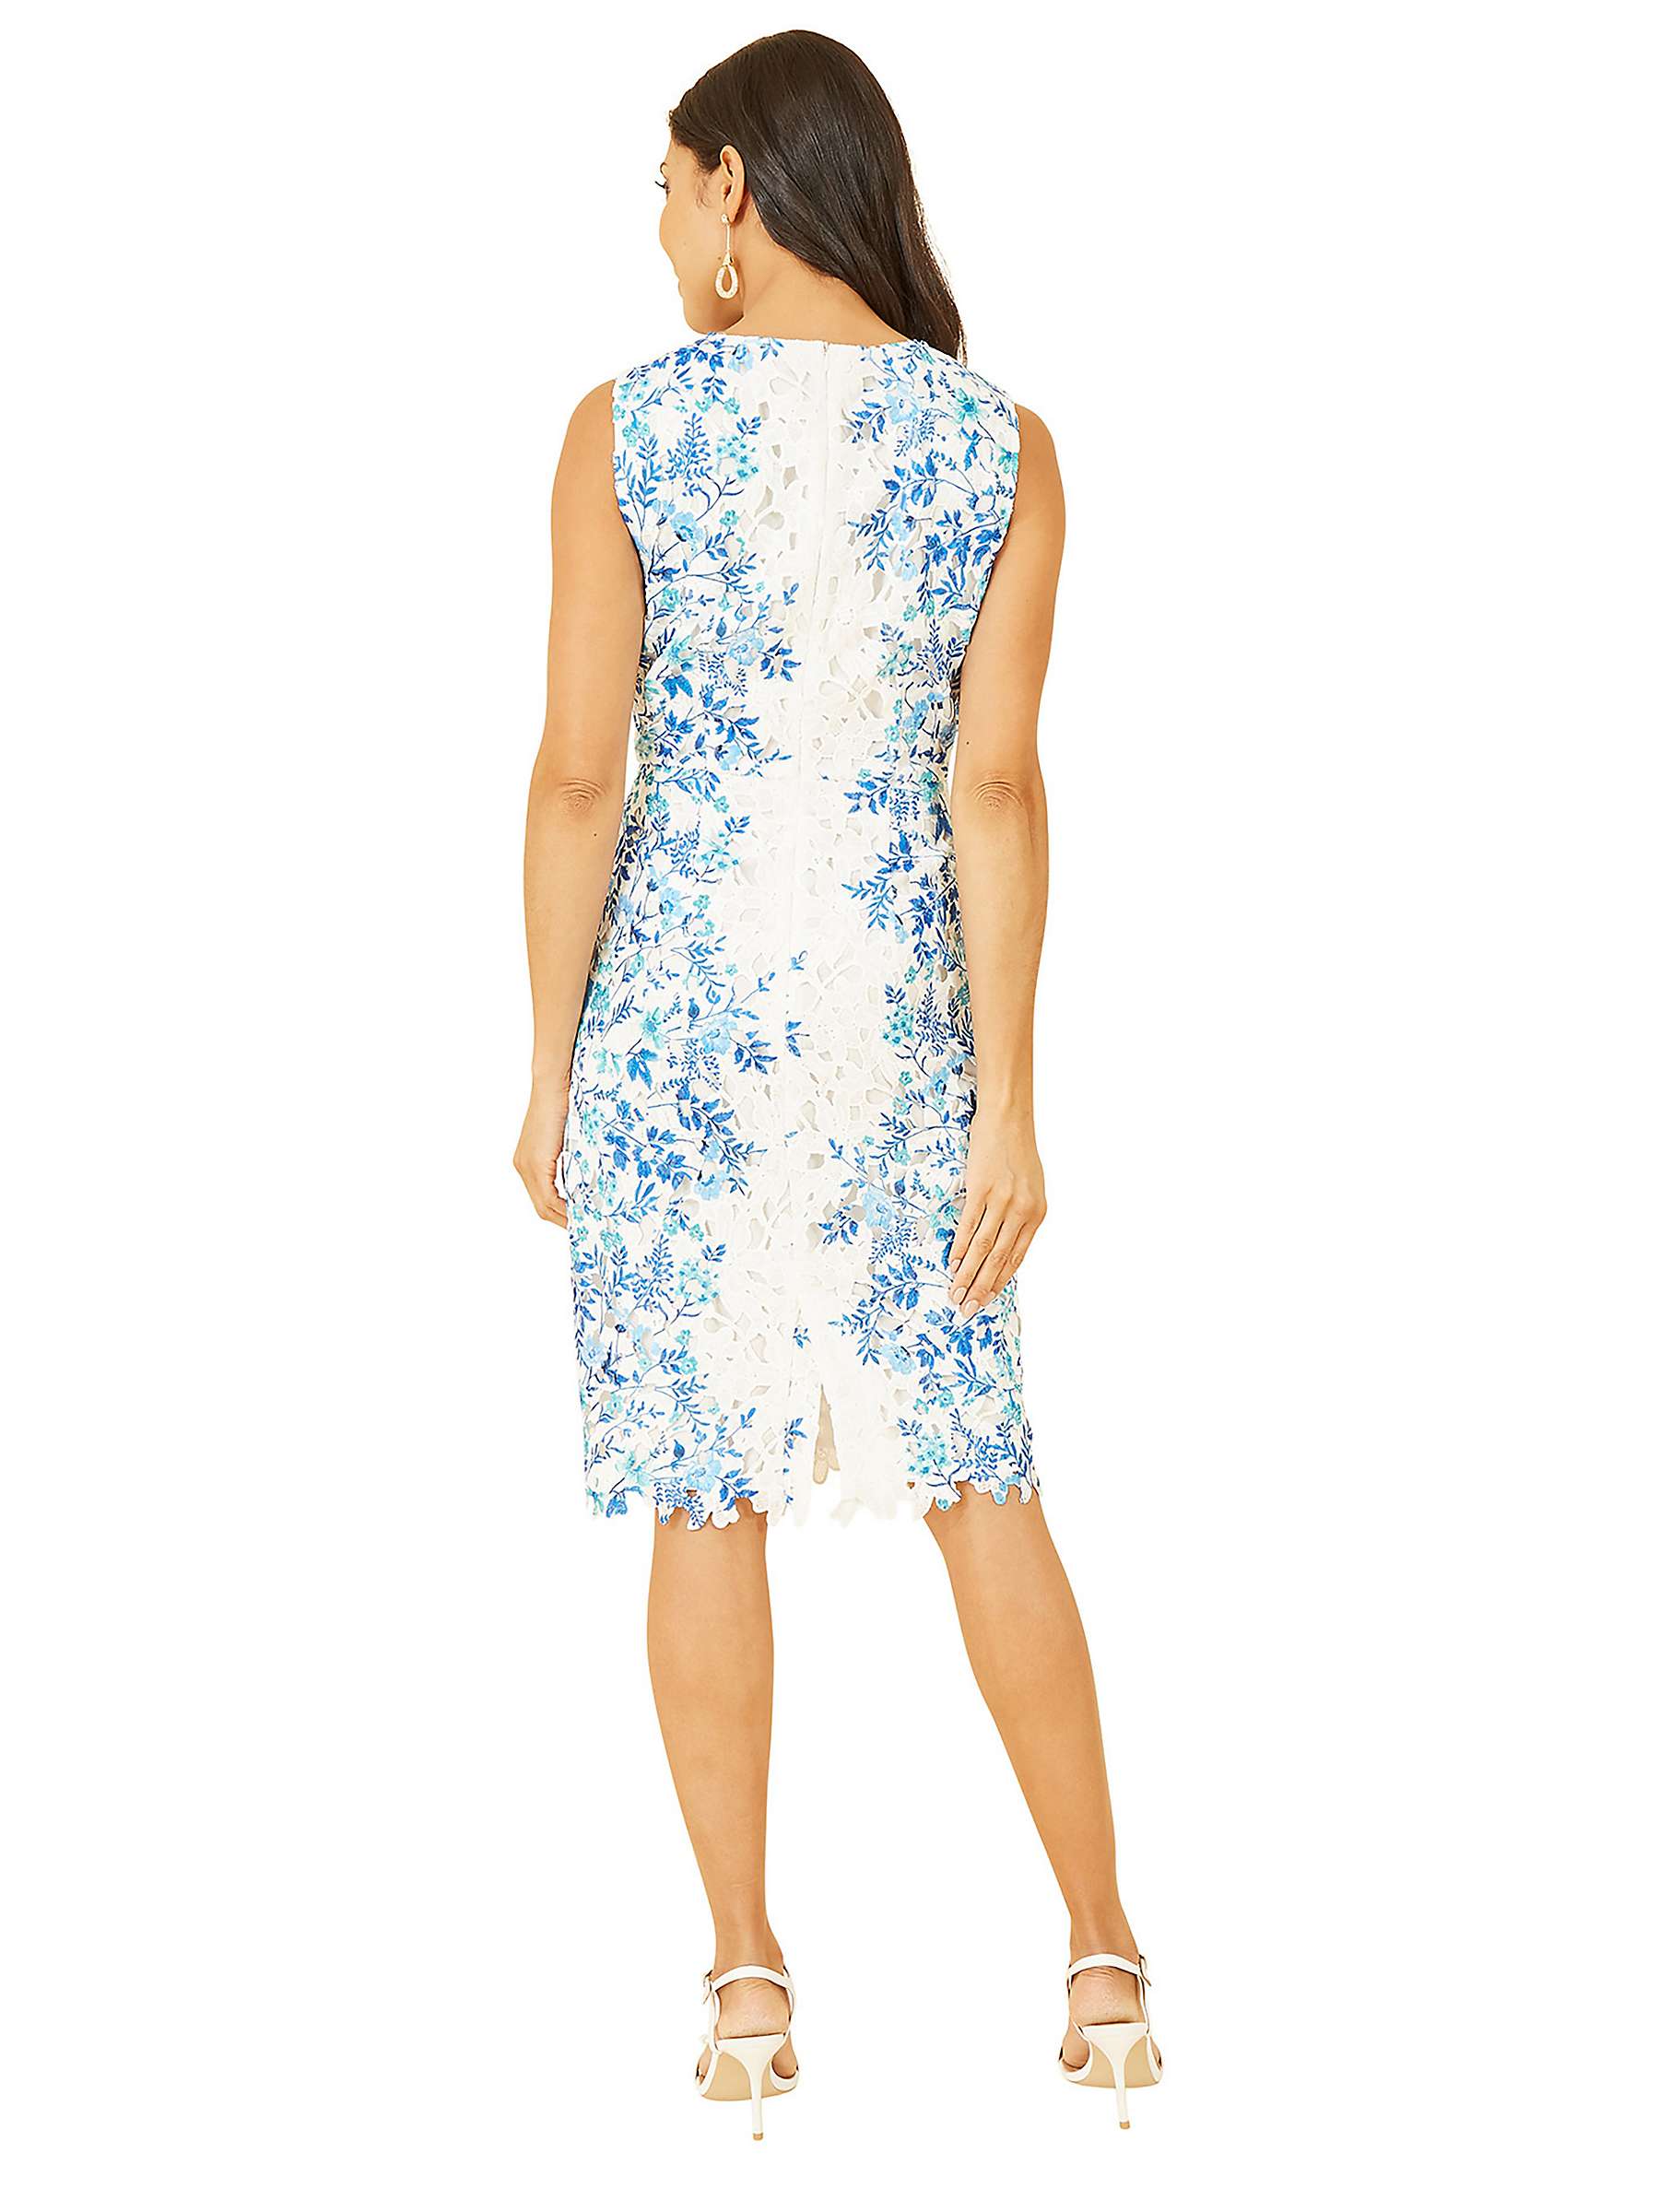 Buy Yumi Floral Lace Sheath Dress, White Online at johnlewis.com